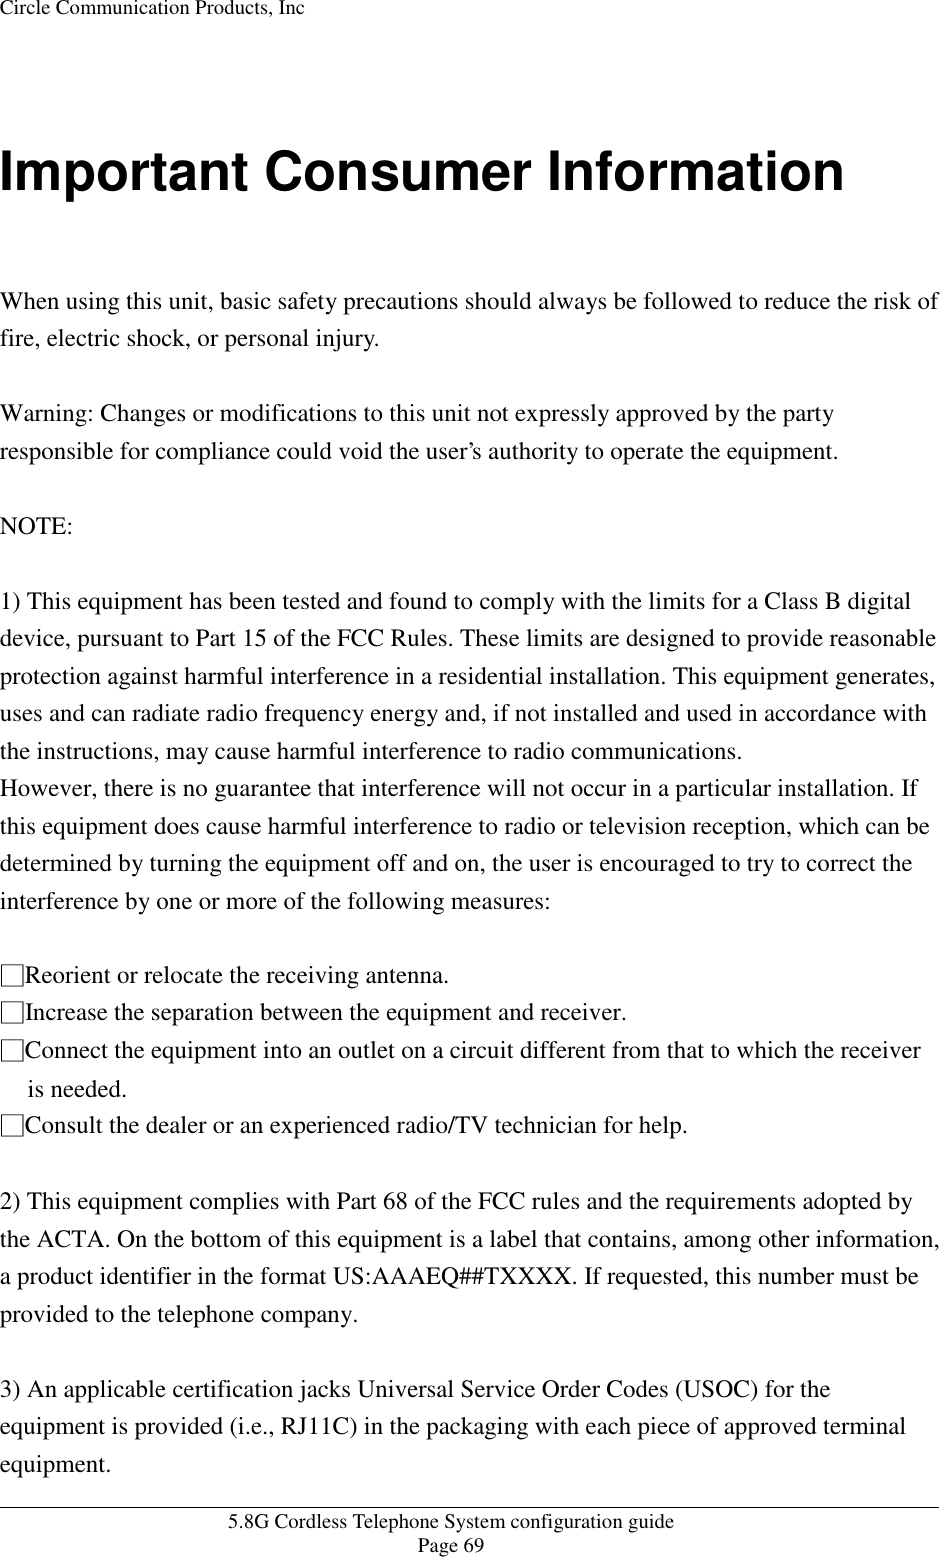 Circle Communication Products, Inc   5.8G Cordless Telephone System configuration guide Page 69  Important Consumer Information  When using this unit, basic safety precautions should always be followed to reduce the risk of fire, electric shock, or personal injury.  Warning: Changes or modifications to this unit not expressly approved by the party responsible for compliance could void the user’s authority to operate the equipment.   NOTE:   1) This equipment has been tested and found to comply with the limits for a Class B digital device, pursuant to Part 15 of the FCC Rules. These limits are designed to provide reasonable protection against harmful interference in a residential installation. This equipment generates, uses and can radiate radio frequency energy and, if not installed and used in accordance with the instructions, may cause harmful interference to radio communications. However, there is no guarantee that interference will not occur in a particular installation. If this equipment does cause harmful interference to radio or television reception, which can be determined by turning the equipment off and on, the user is encouraged to try to correct the interference by one or more of the following measures:  íReorient or relocate the receiving antenna. íIncrease the separation between the equipment and receiver. íConnect the equipment into an outlet on a circuit different from that to which the receiver is needed. íConsult the dealer or an experienced radio/TV technician for help.  2) This equipment complies with Part 68 of the FCC rules and the requirements adopted by the ACTA. On the bottom of this equipment is a label that contains, among other information, a product identifier in the format US:AAAEQ##TXXXX. If requested, this number must be provided to the telephone company.  3) An applicable certification jacks Universal Service Order Codes (USOC) for the equipment is provided (i.e., RJ11C) in the packaging with each piece of approved terminal equipment. 